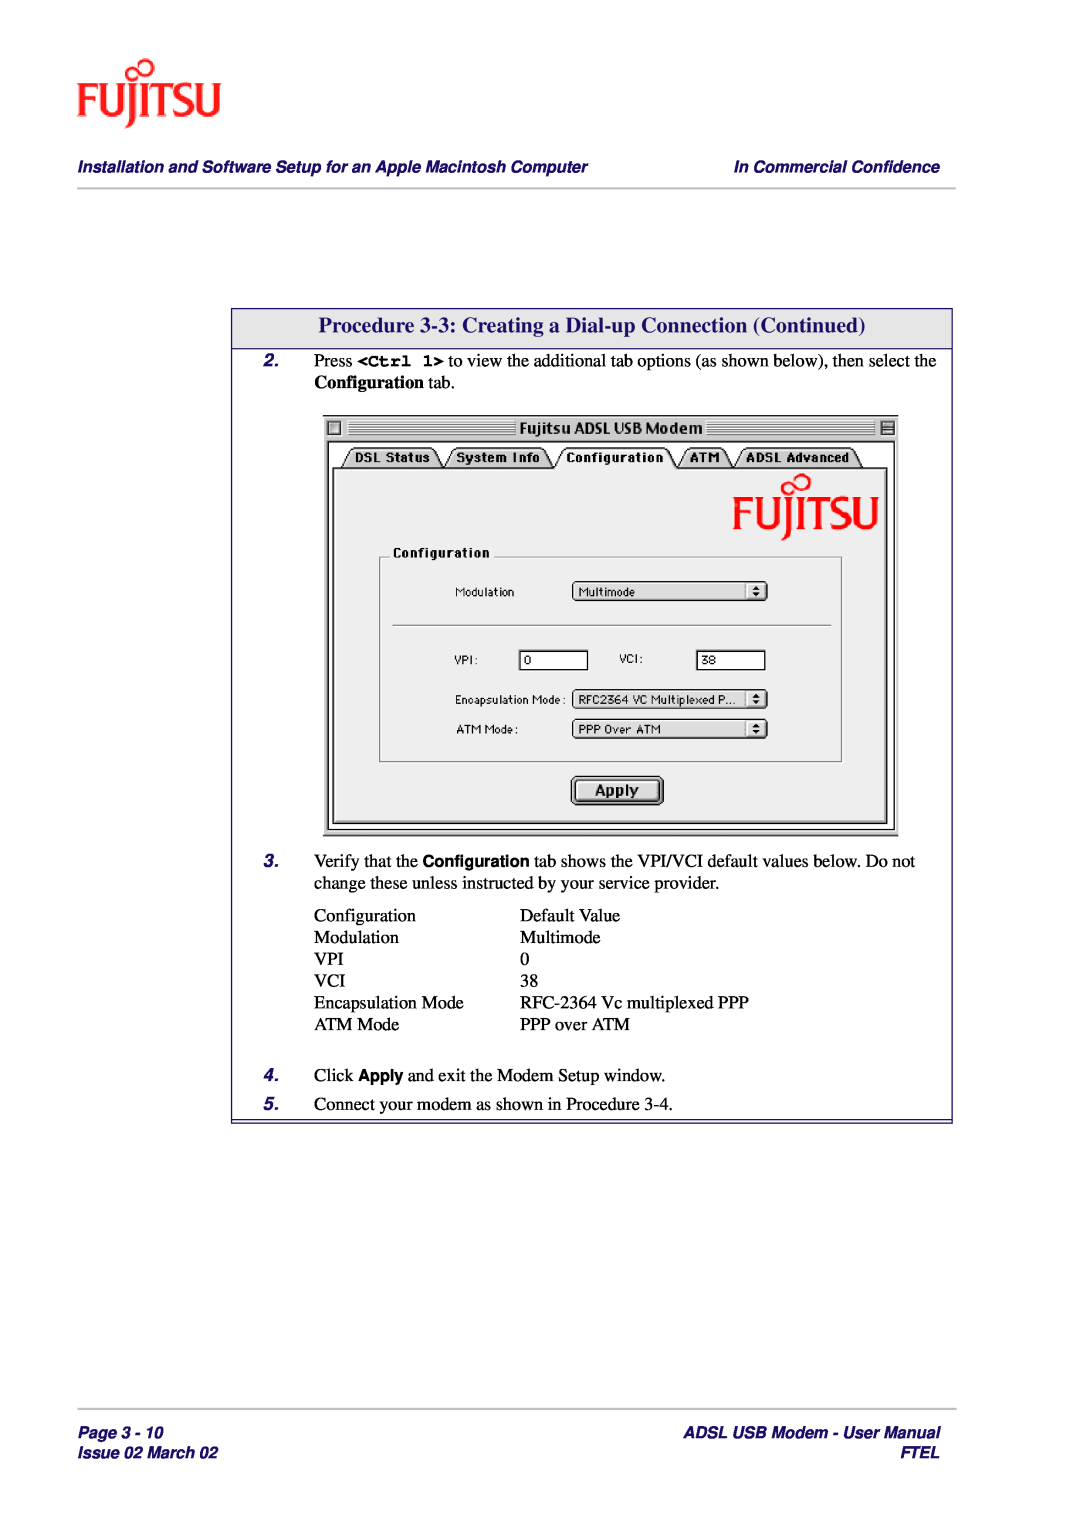 Fujitsu 3XAX-00803AAS user manual Procedure 3-3 Creating a Dial-up Connection Continued 